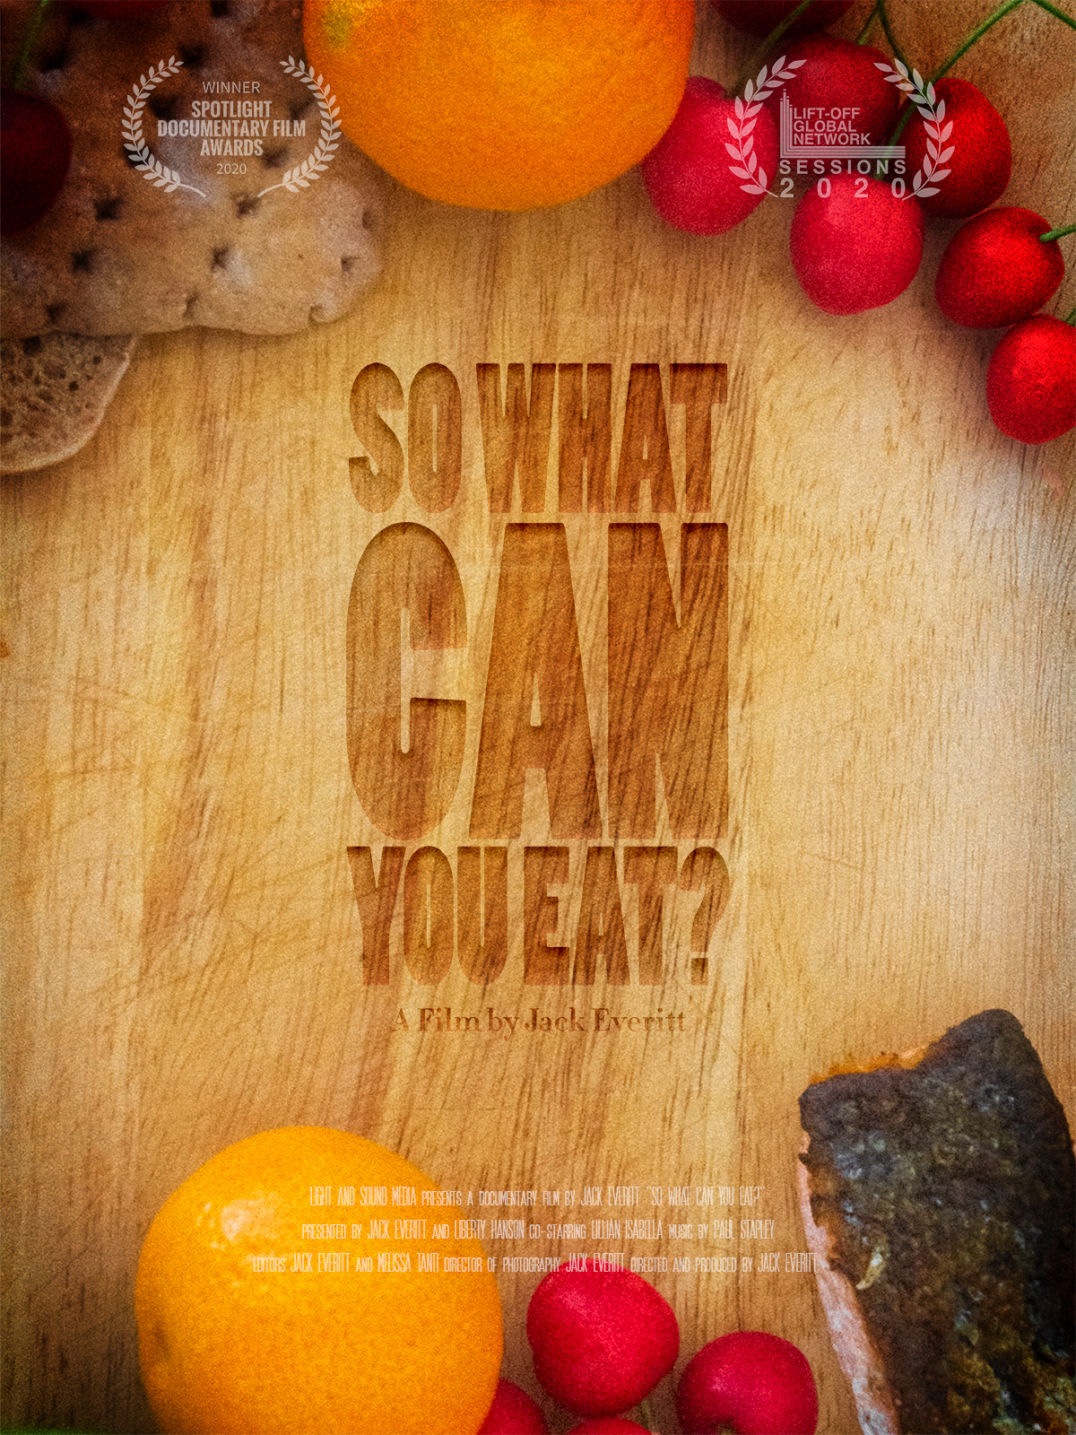 So What Can You Eat? Poster